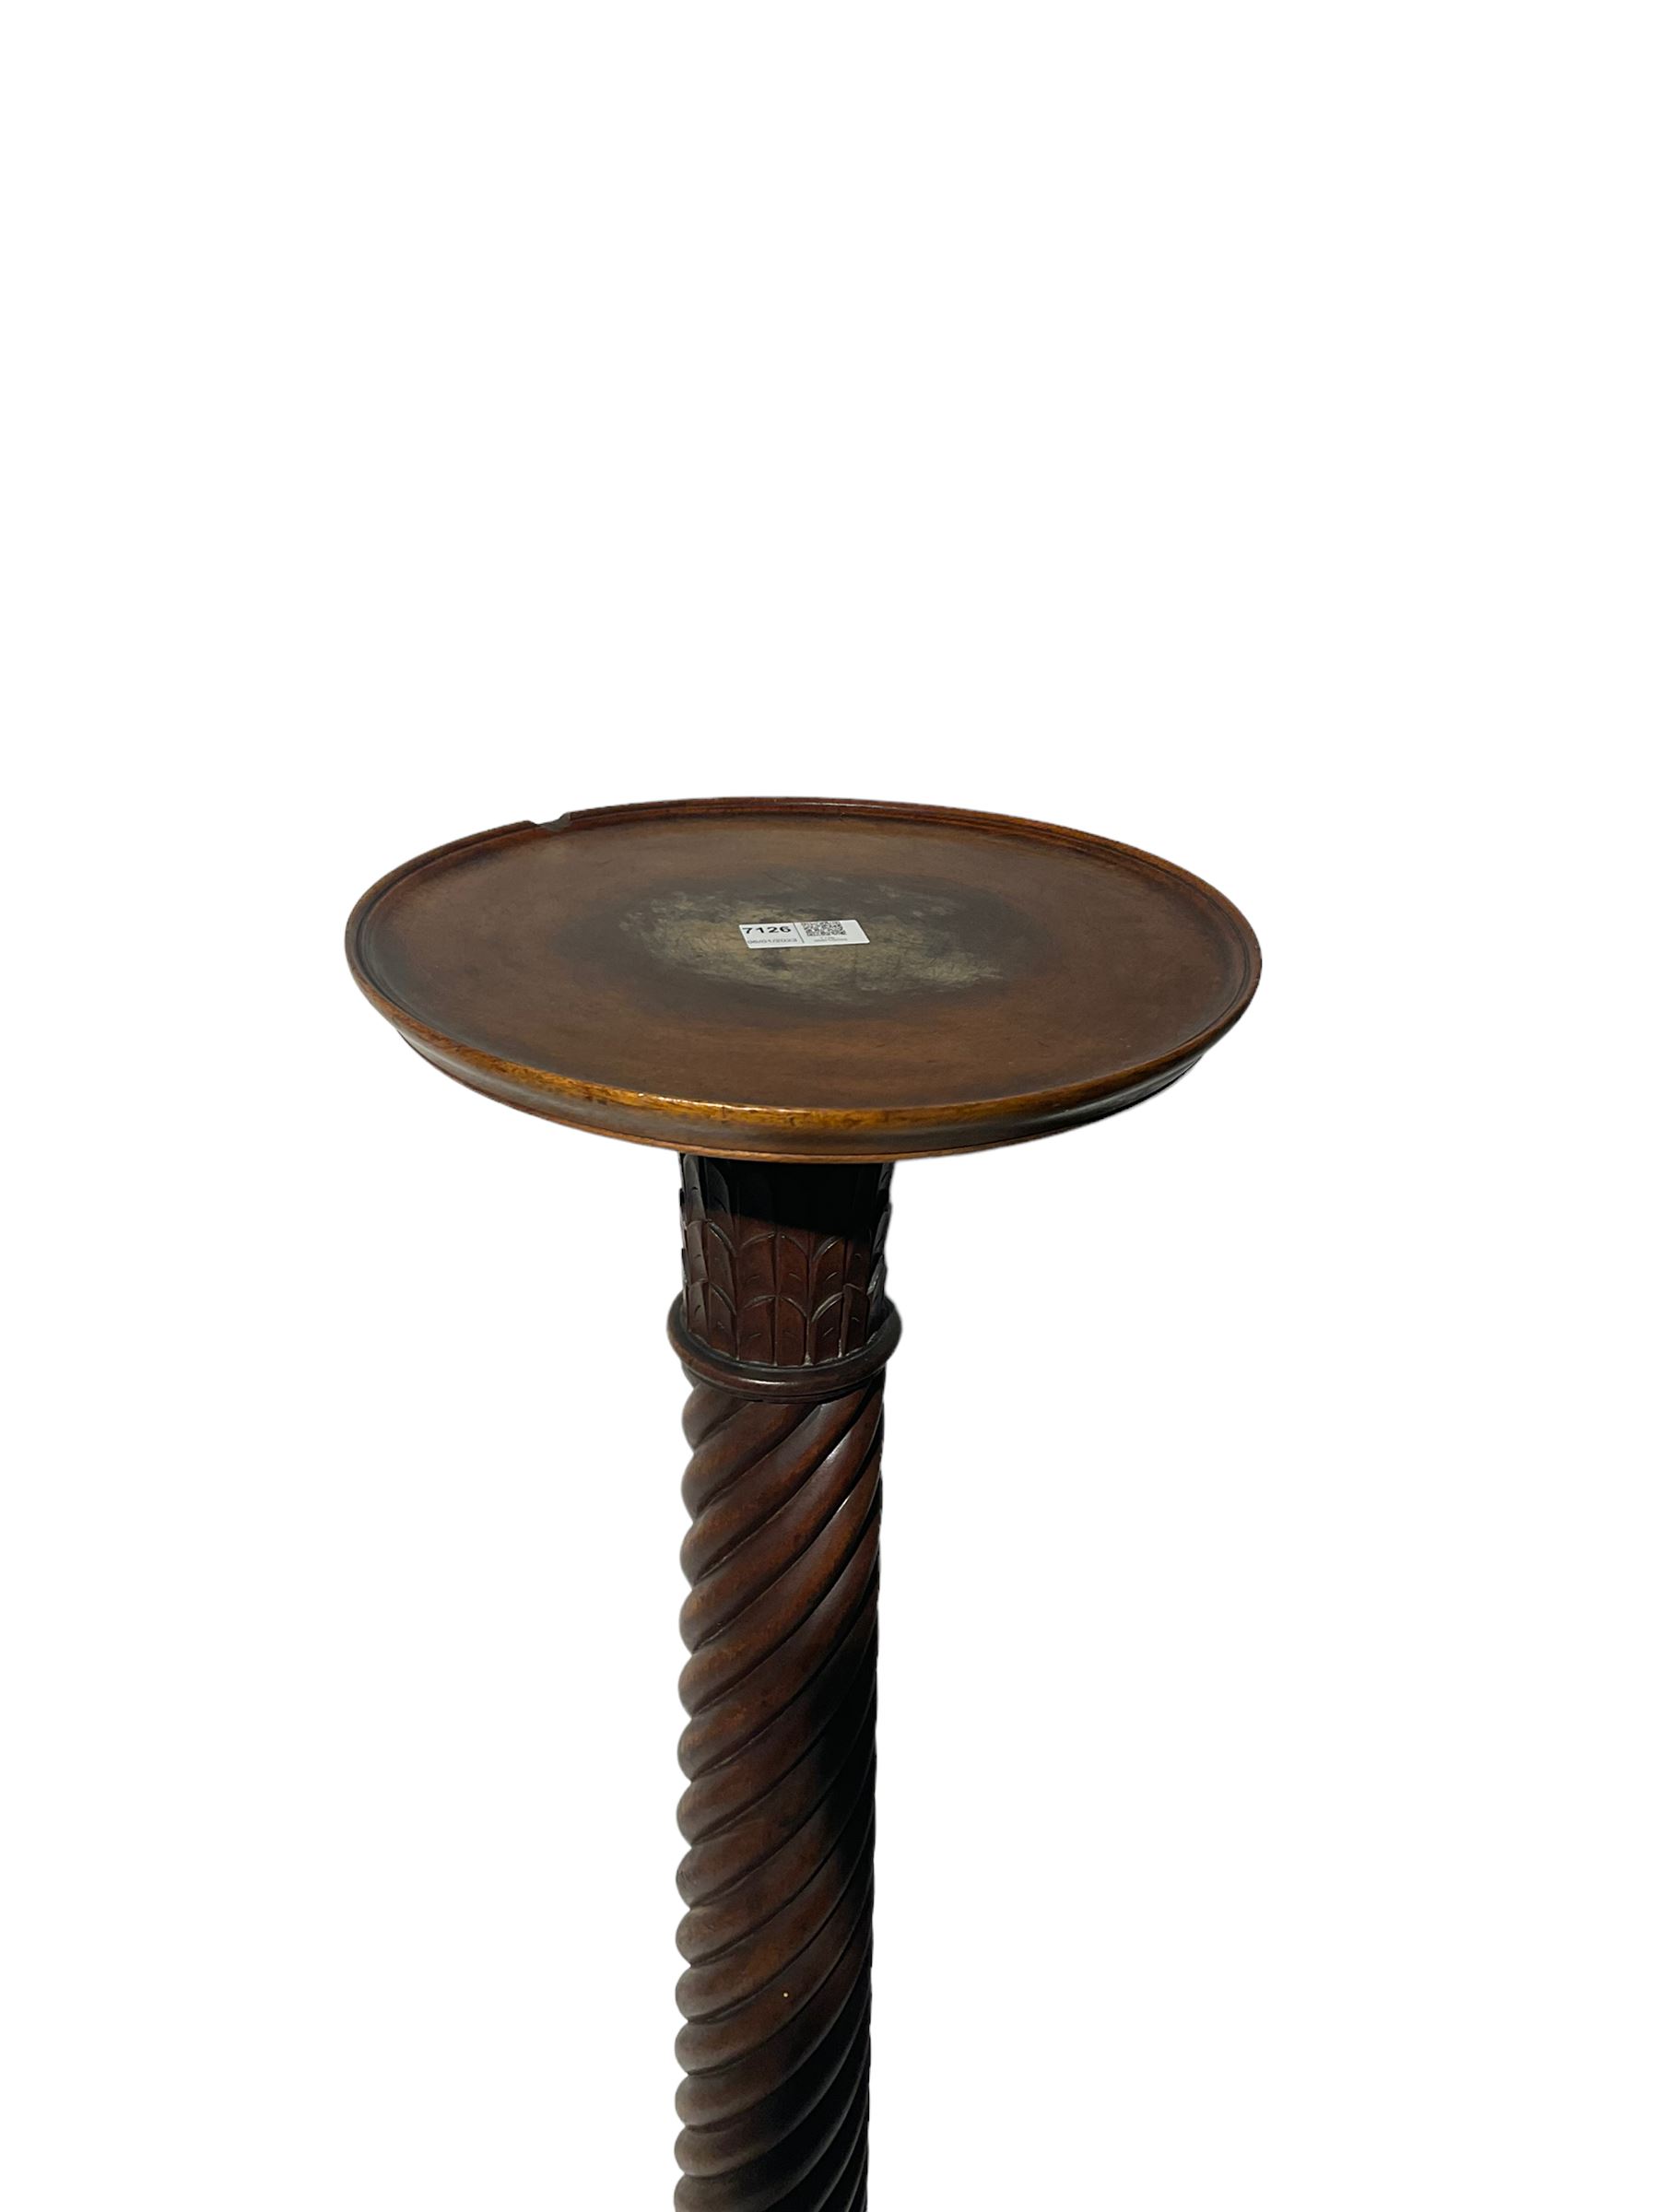 Late 19th century mahogany plant stand - Image 2 of 4